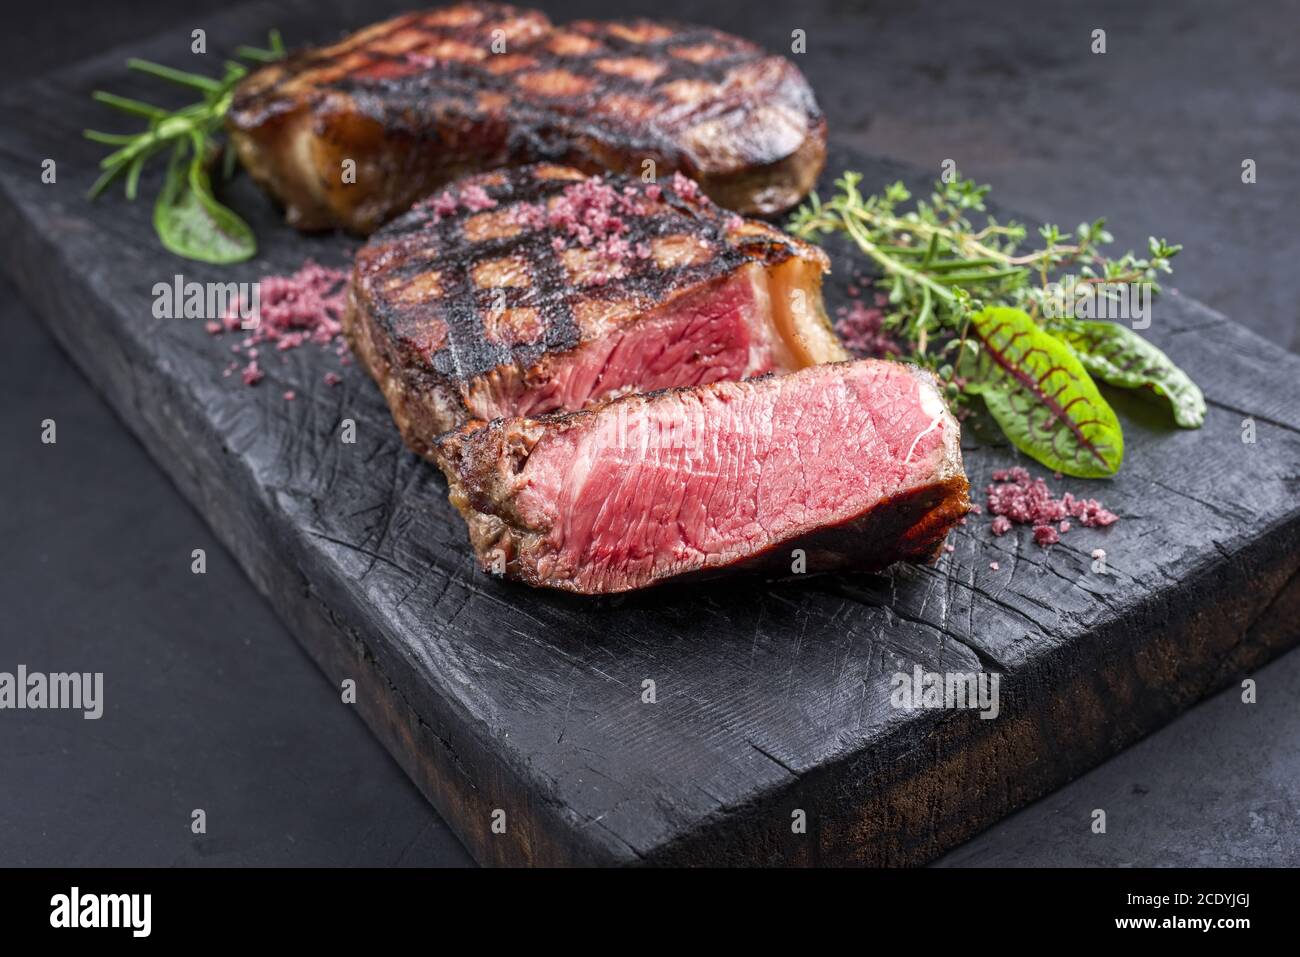 Barbecue dry aged wagyu roast beef steak with lettuce and herbs as closeup on a rustic charred wooden board Stock Photo